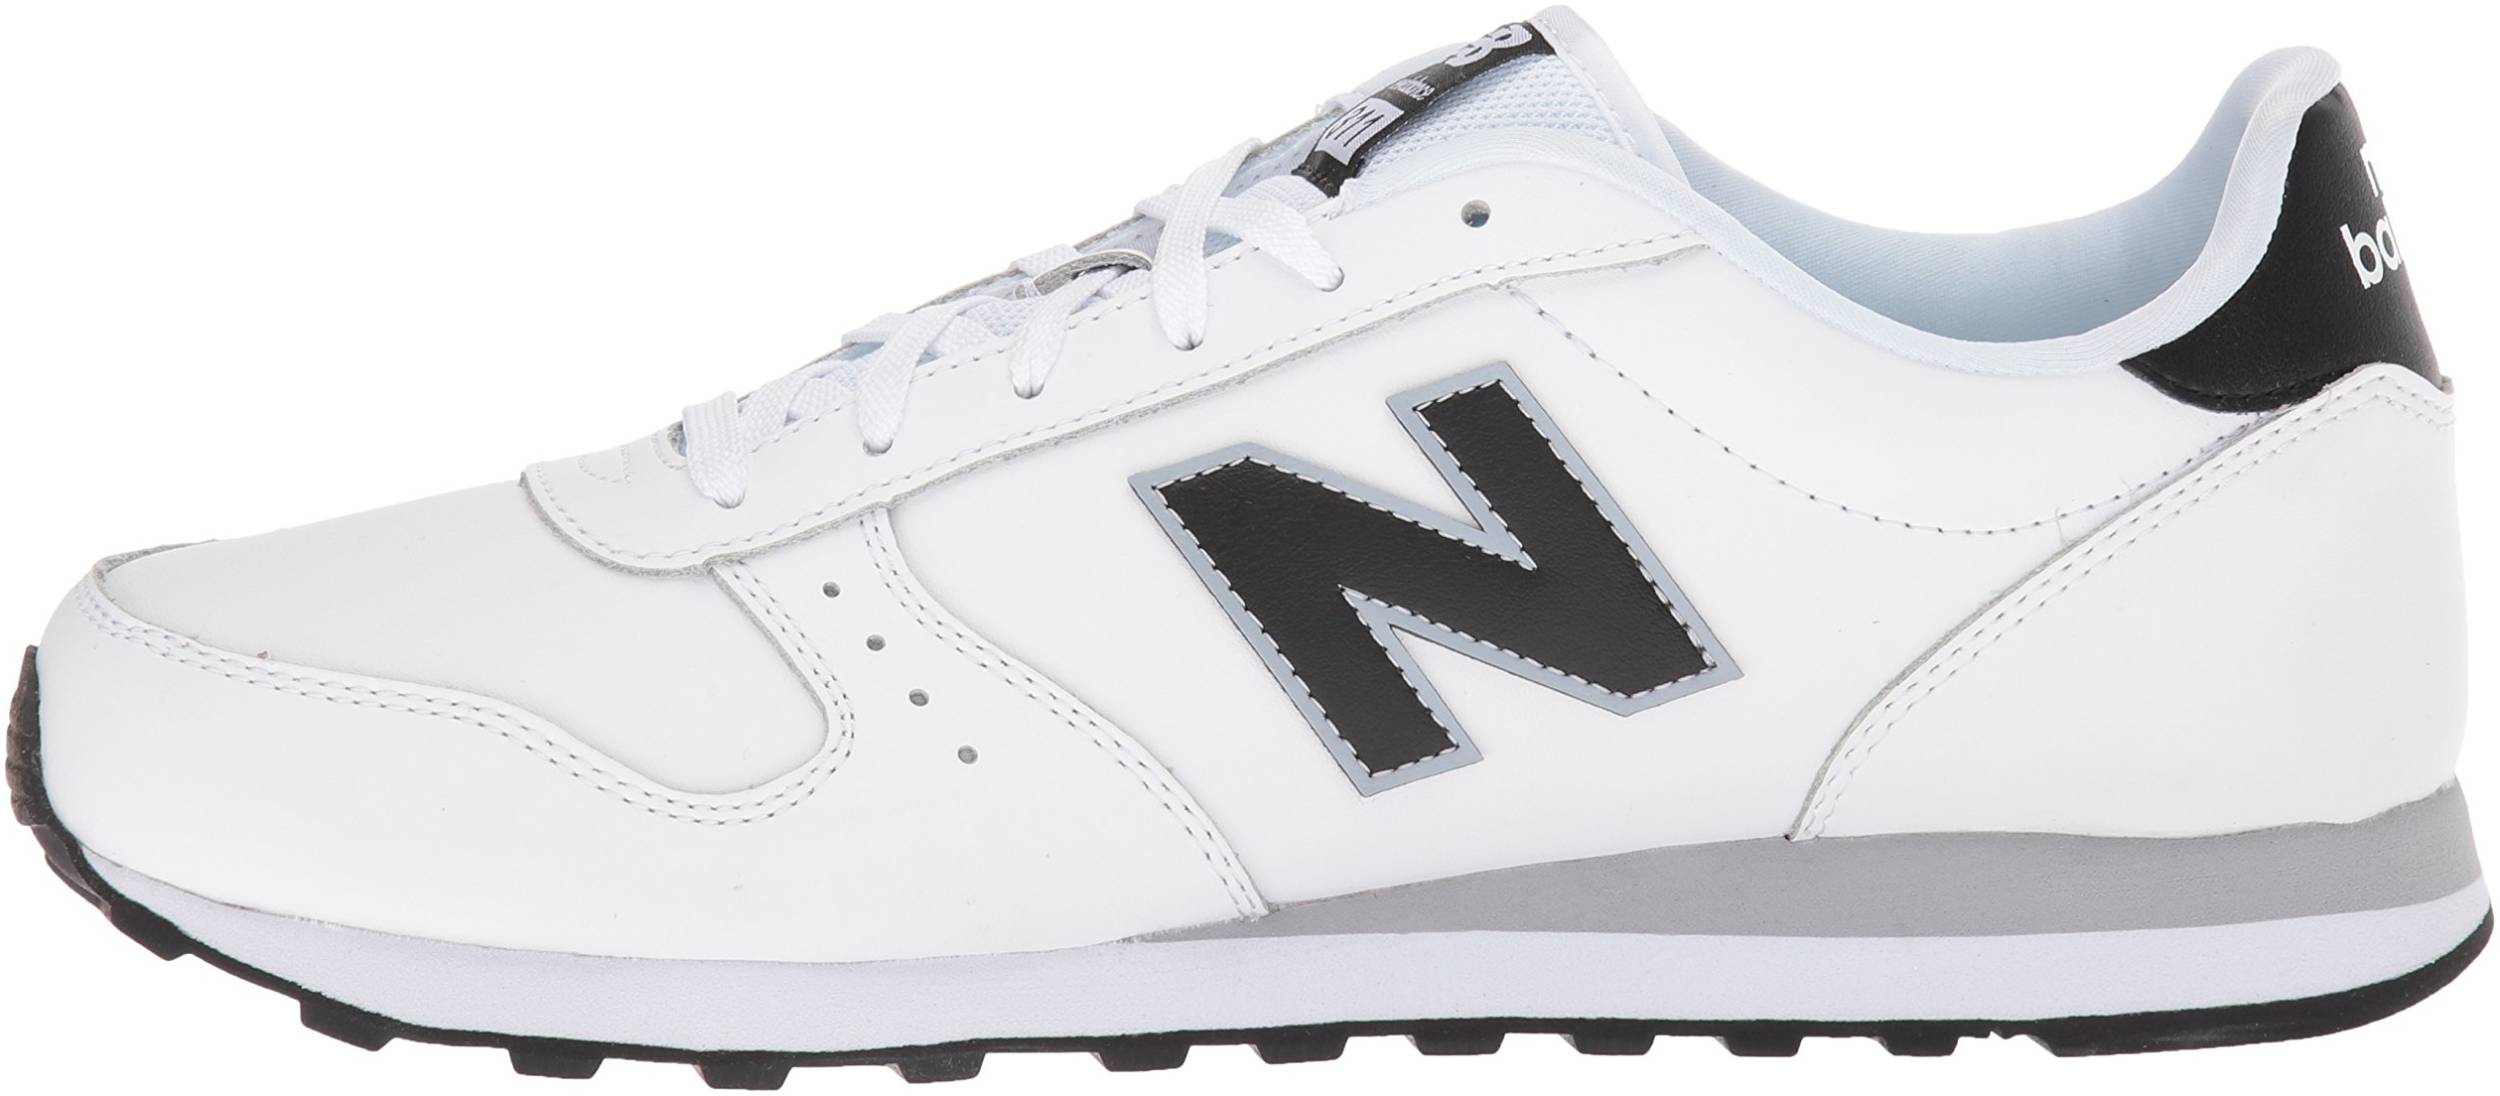 20+ White New Balance sneakers: Save up 